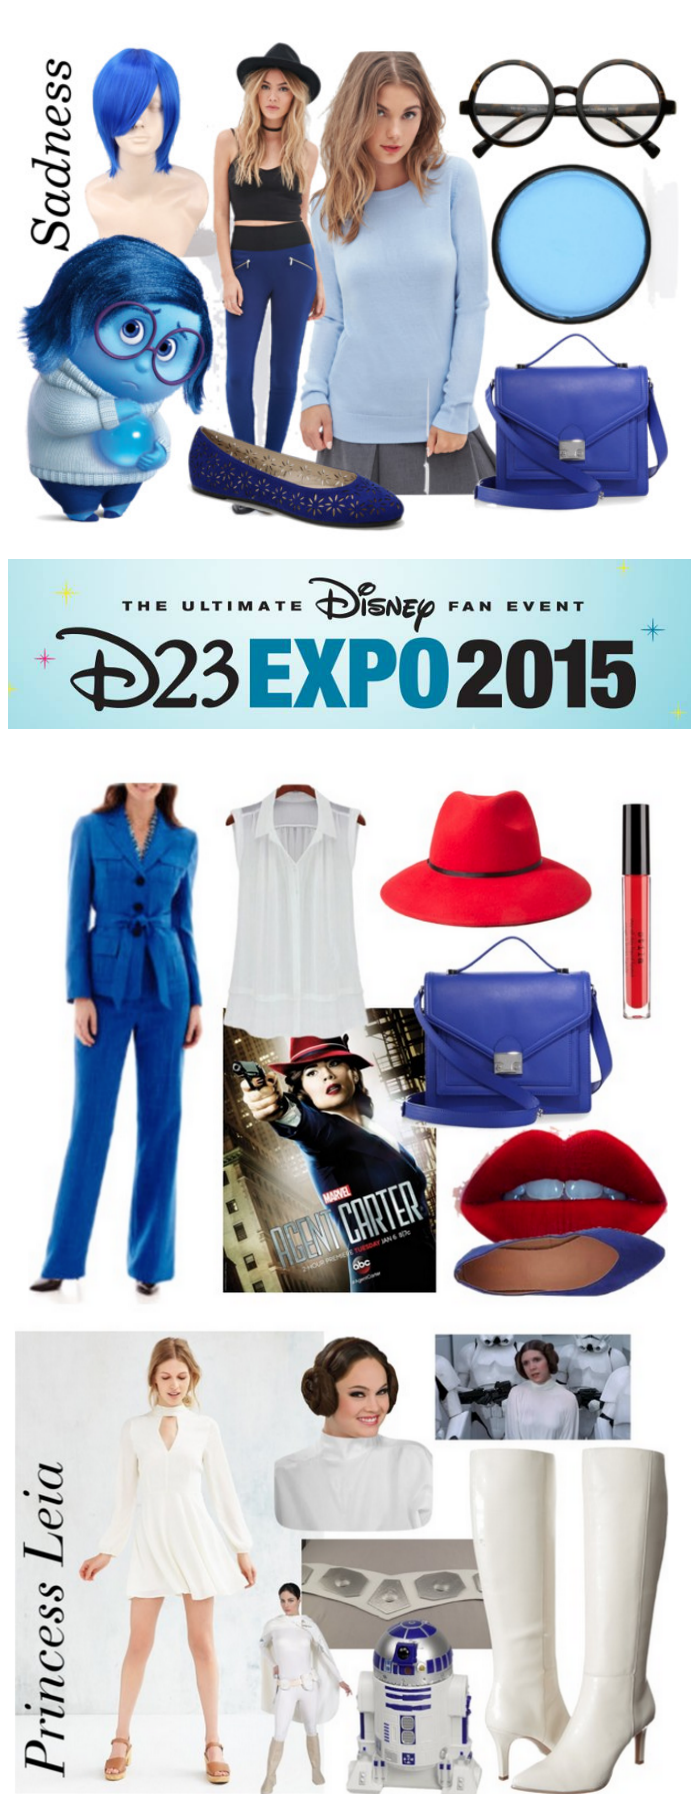 D23 expo 2015 cosplay costume ideas